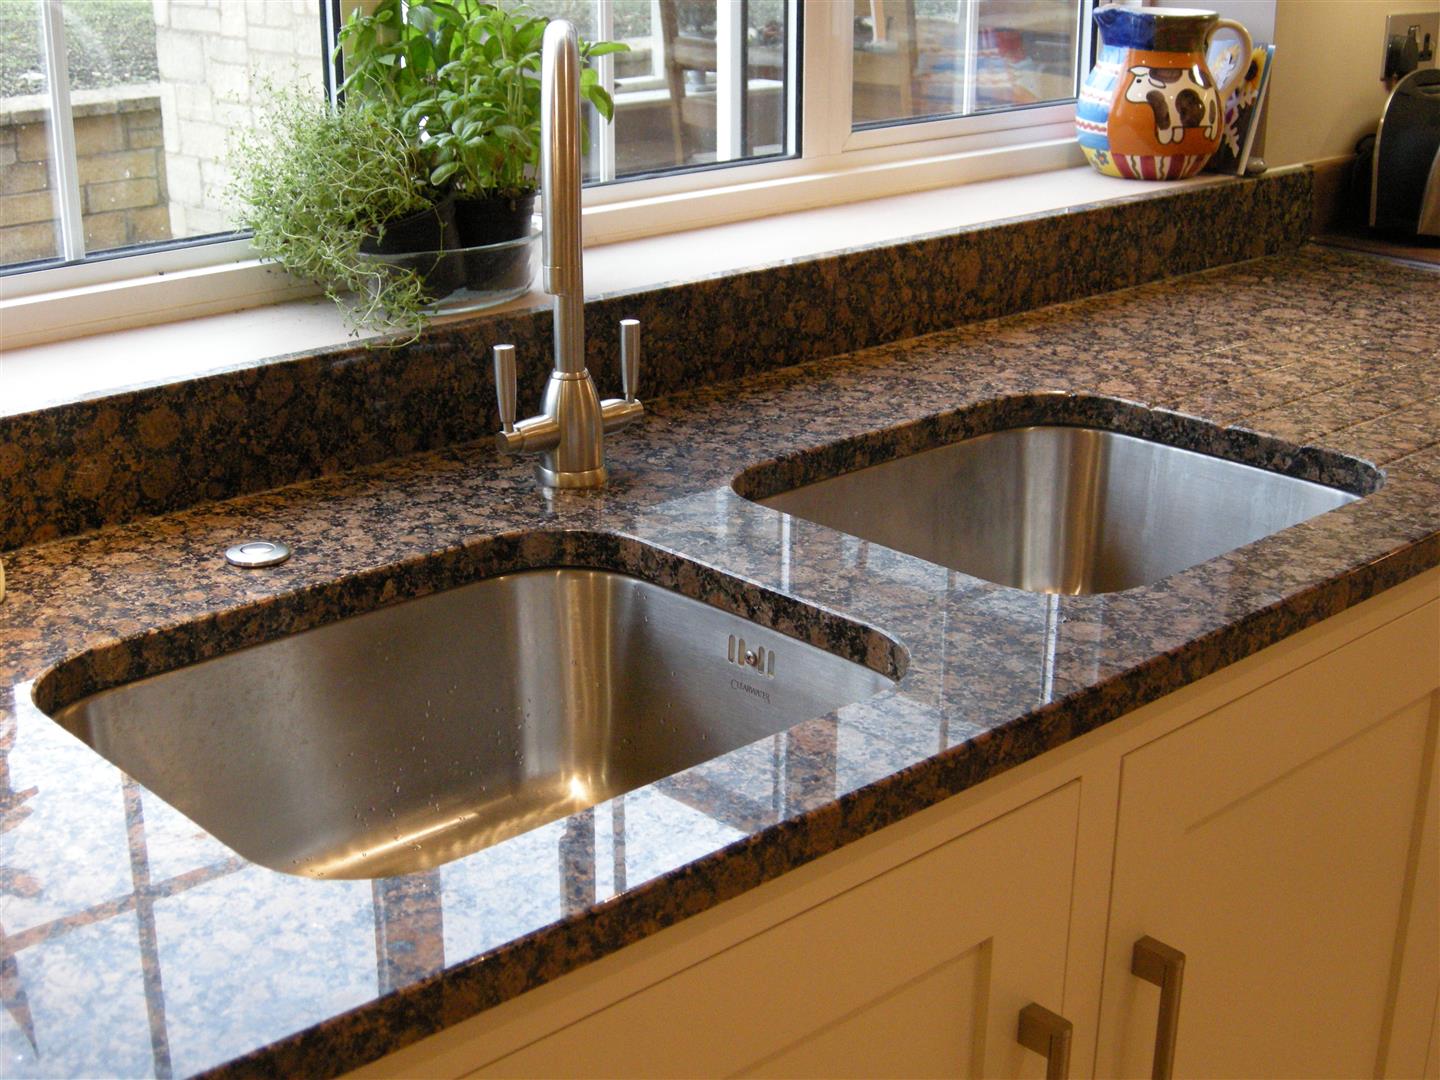 Redbrook kitchens design and install bespoke kitchens in Gloucestershire. Large underslung stainless steel sinks